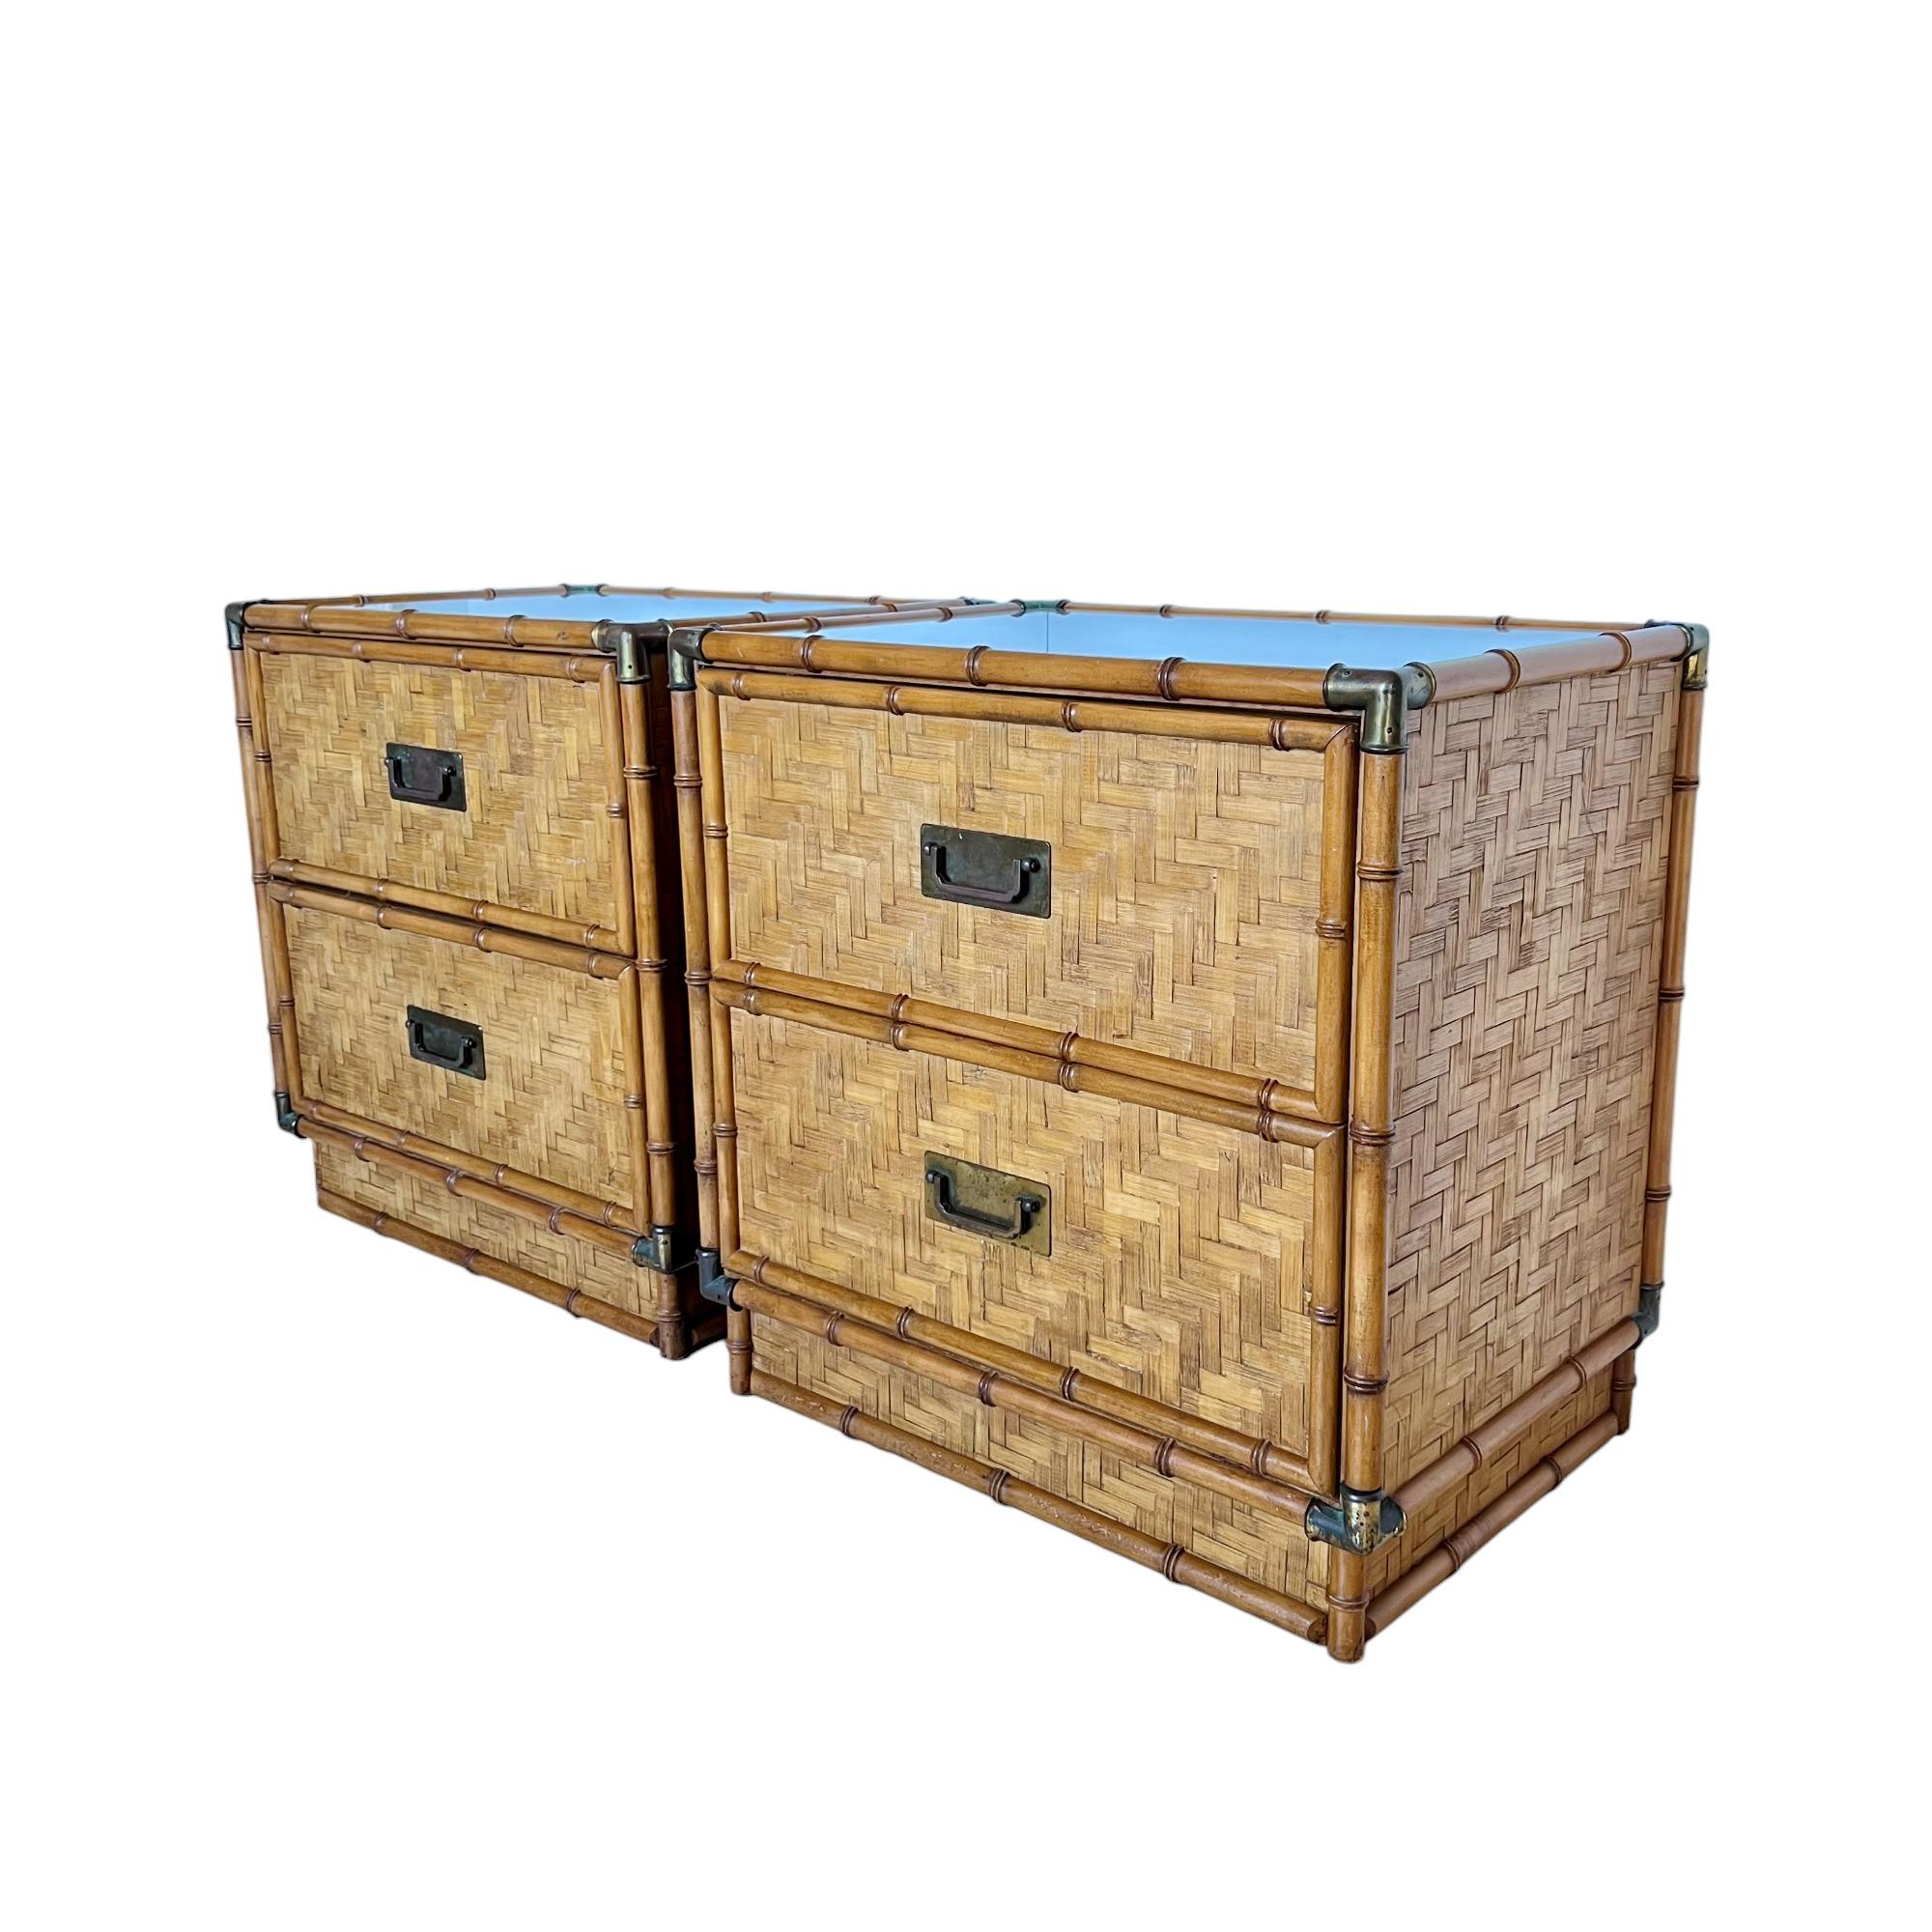 A vintage pair of mid-century modern campaign style two-drawer nightstands or commodes produced by Dixie Furniture, circa 1965. They feature woven split reed paneling with turned wood faux bamboo framing, and are accented with brass handles and